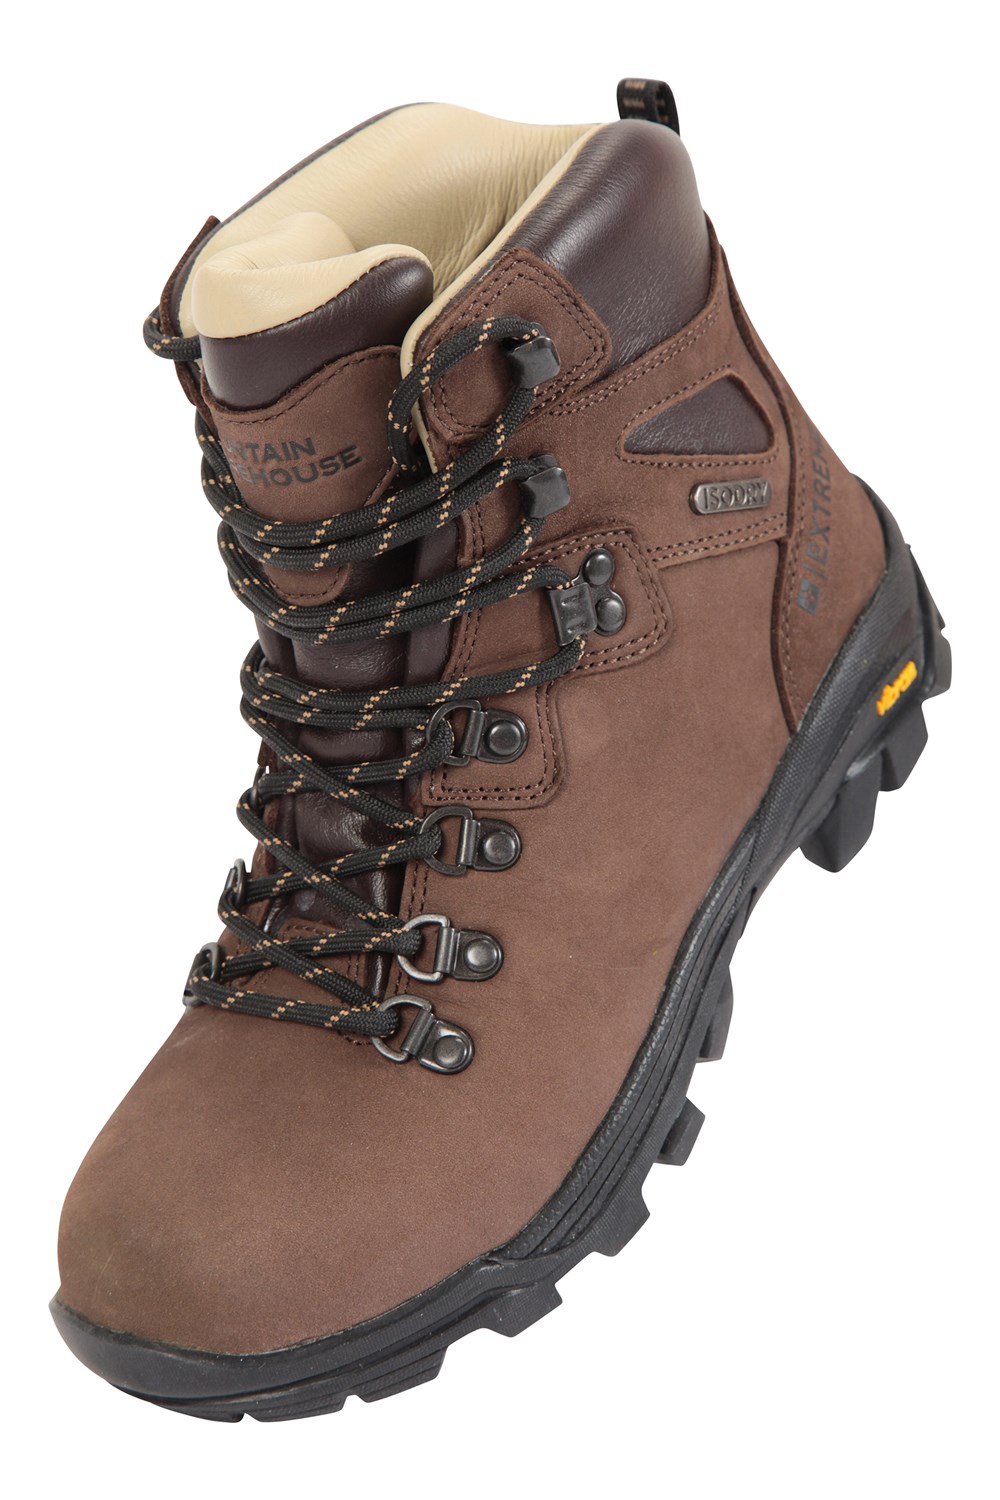 Mountain Warehouse Mens Odyssey Vibram Boots Male Water Repellent ...